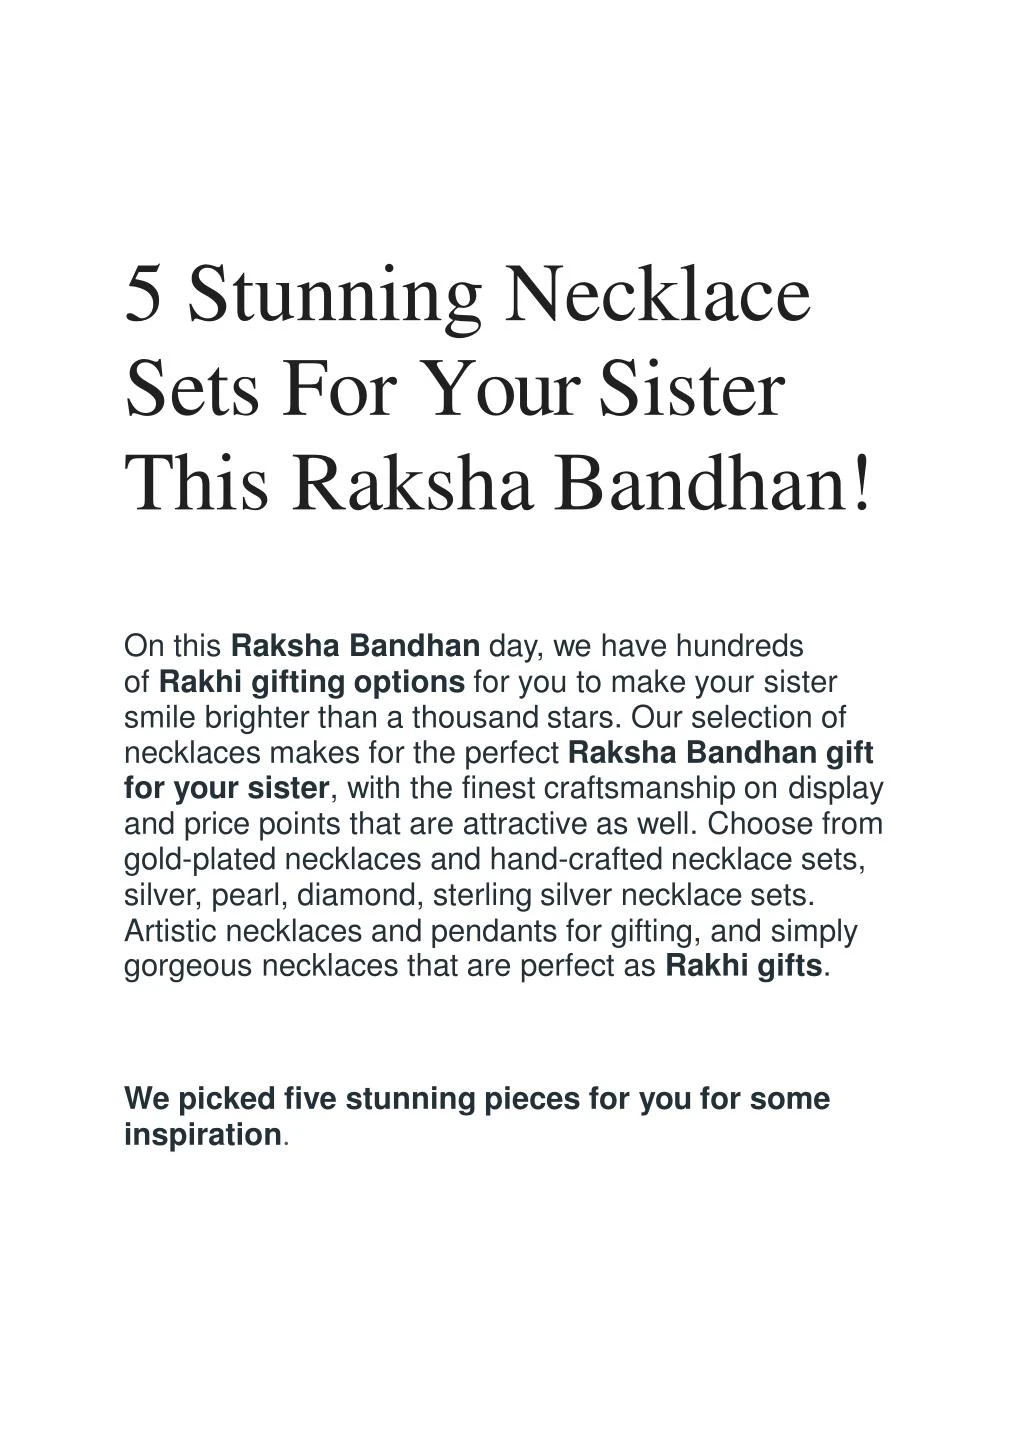 5 stunning necklace sets for your sister this